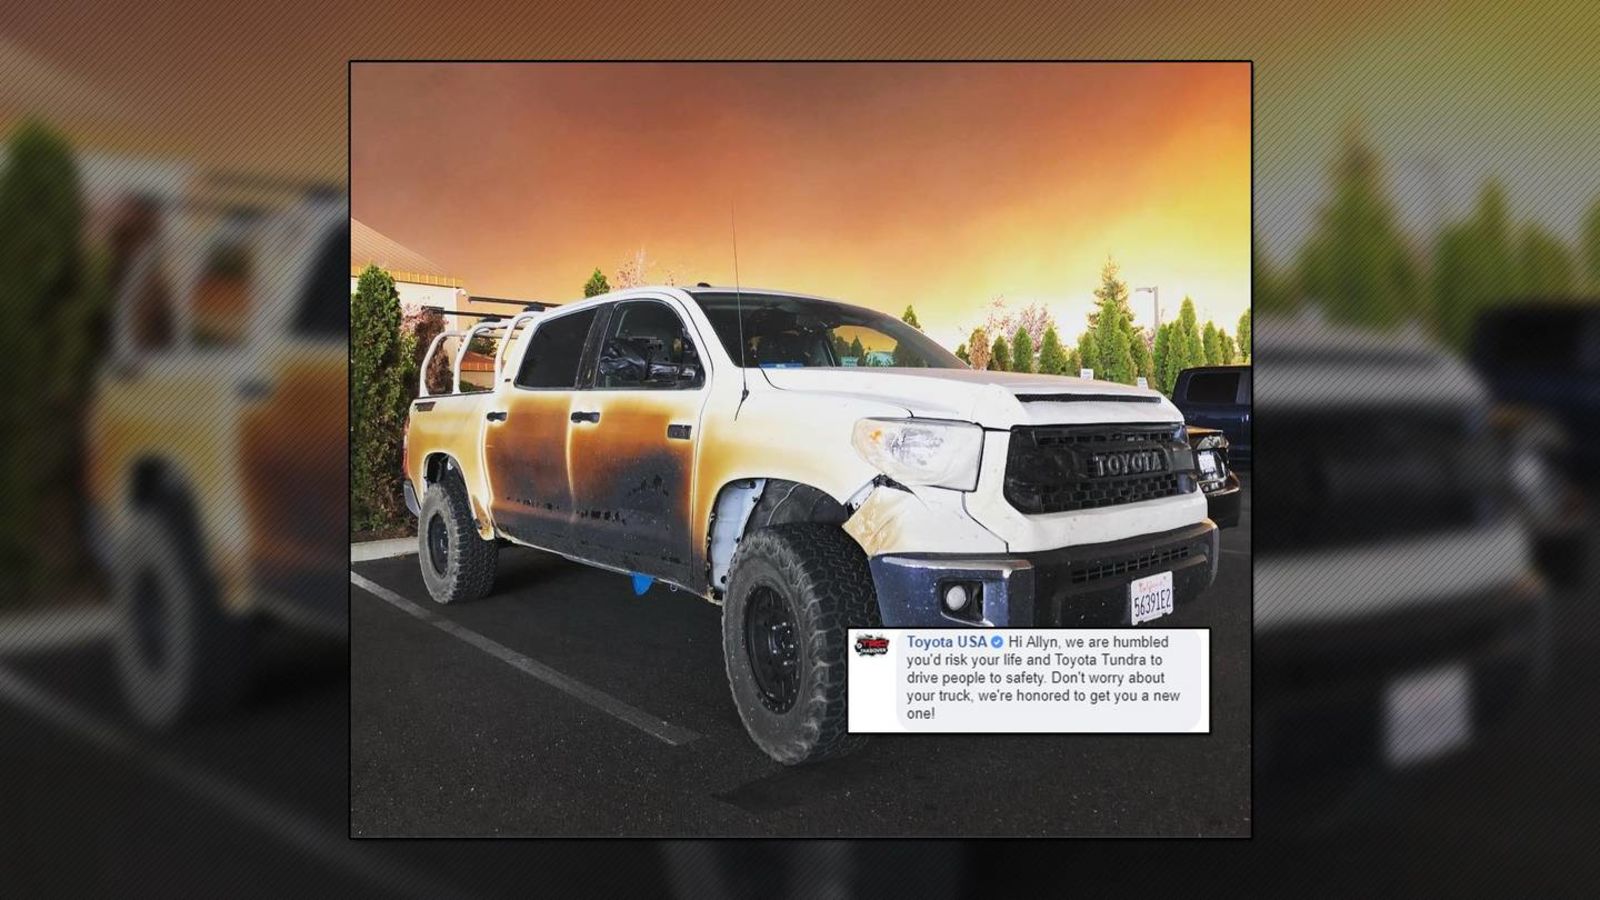 Illustration for article titled Toyota Replaces Nurses Tundra After Heroic Fire Efforts